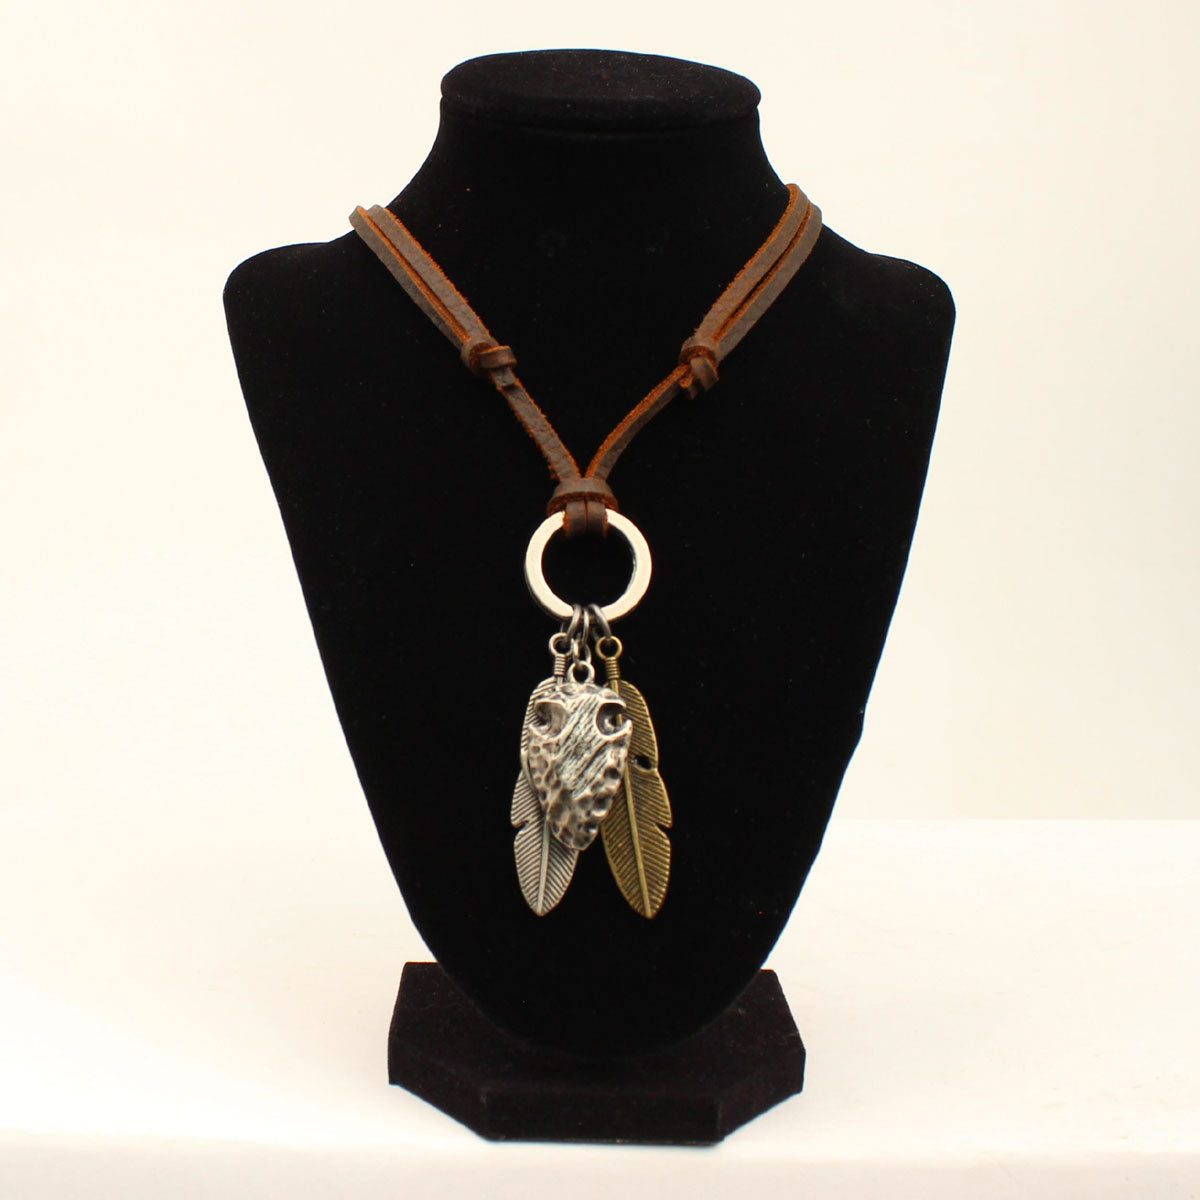 Twister 2 Men's Feather & Arrowhead Adjustable Necklace - Brown w/Silver & Brass